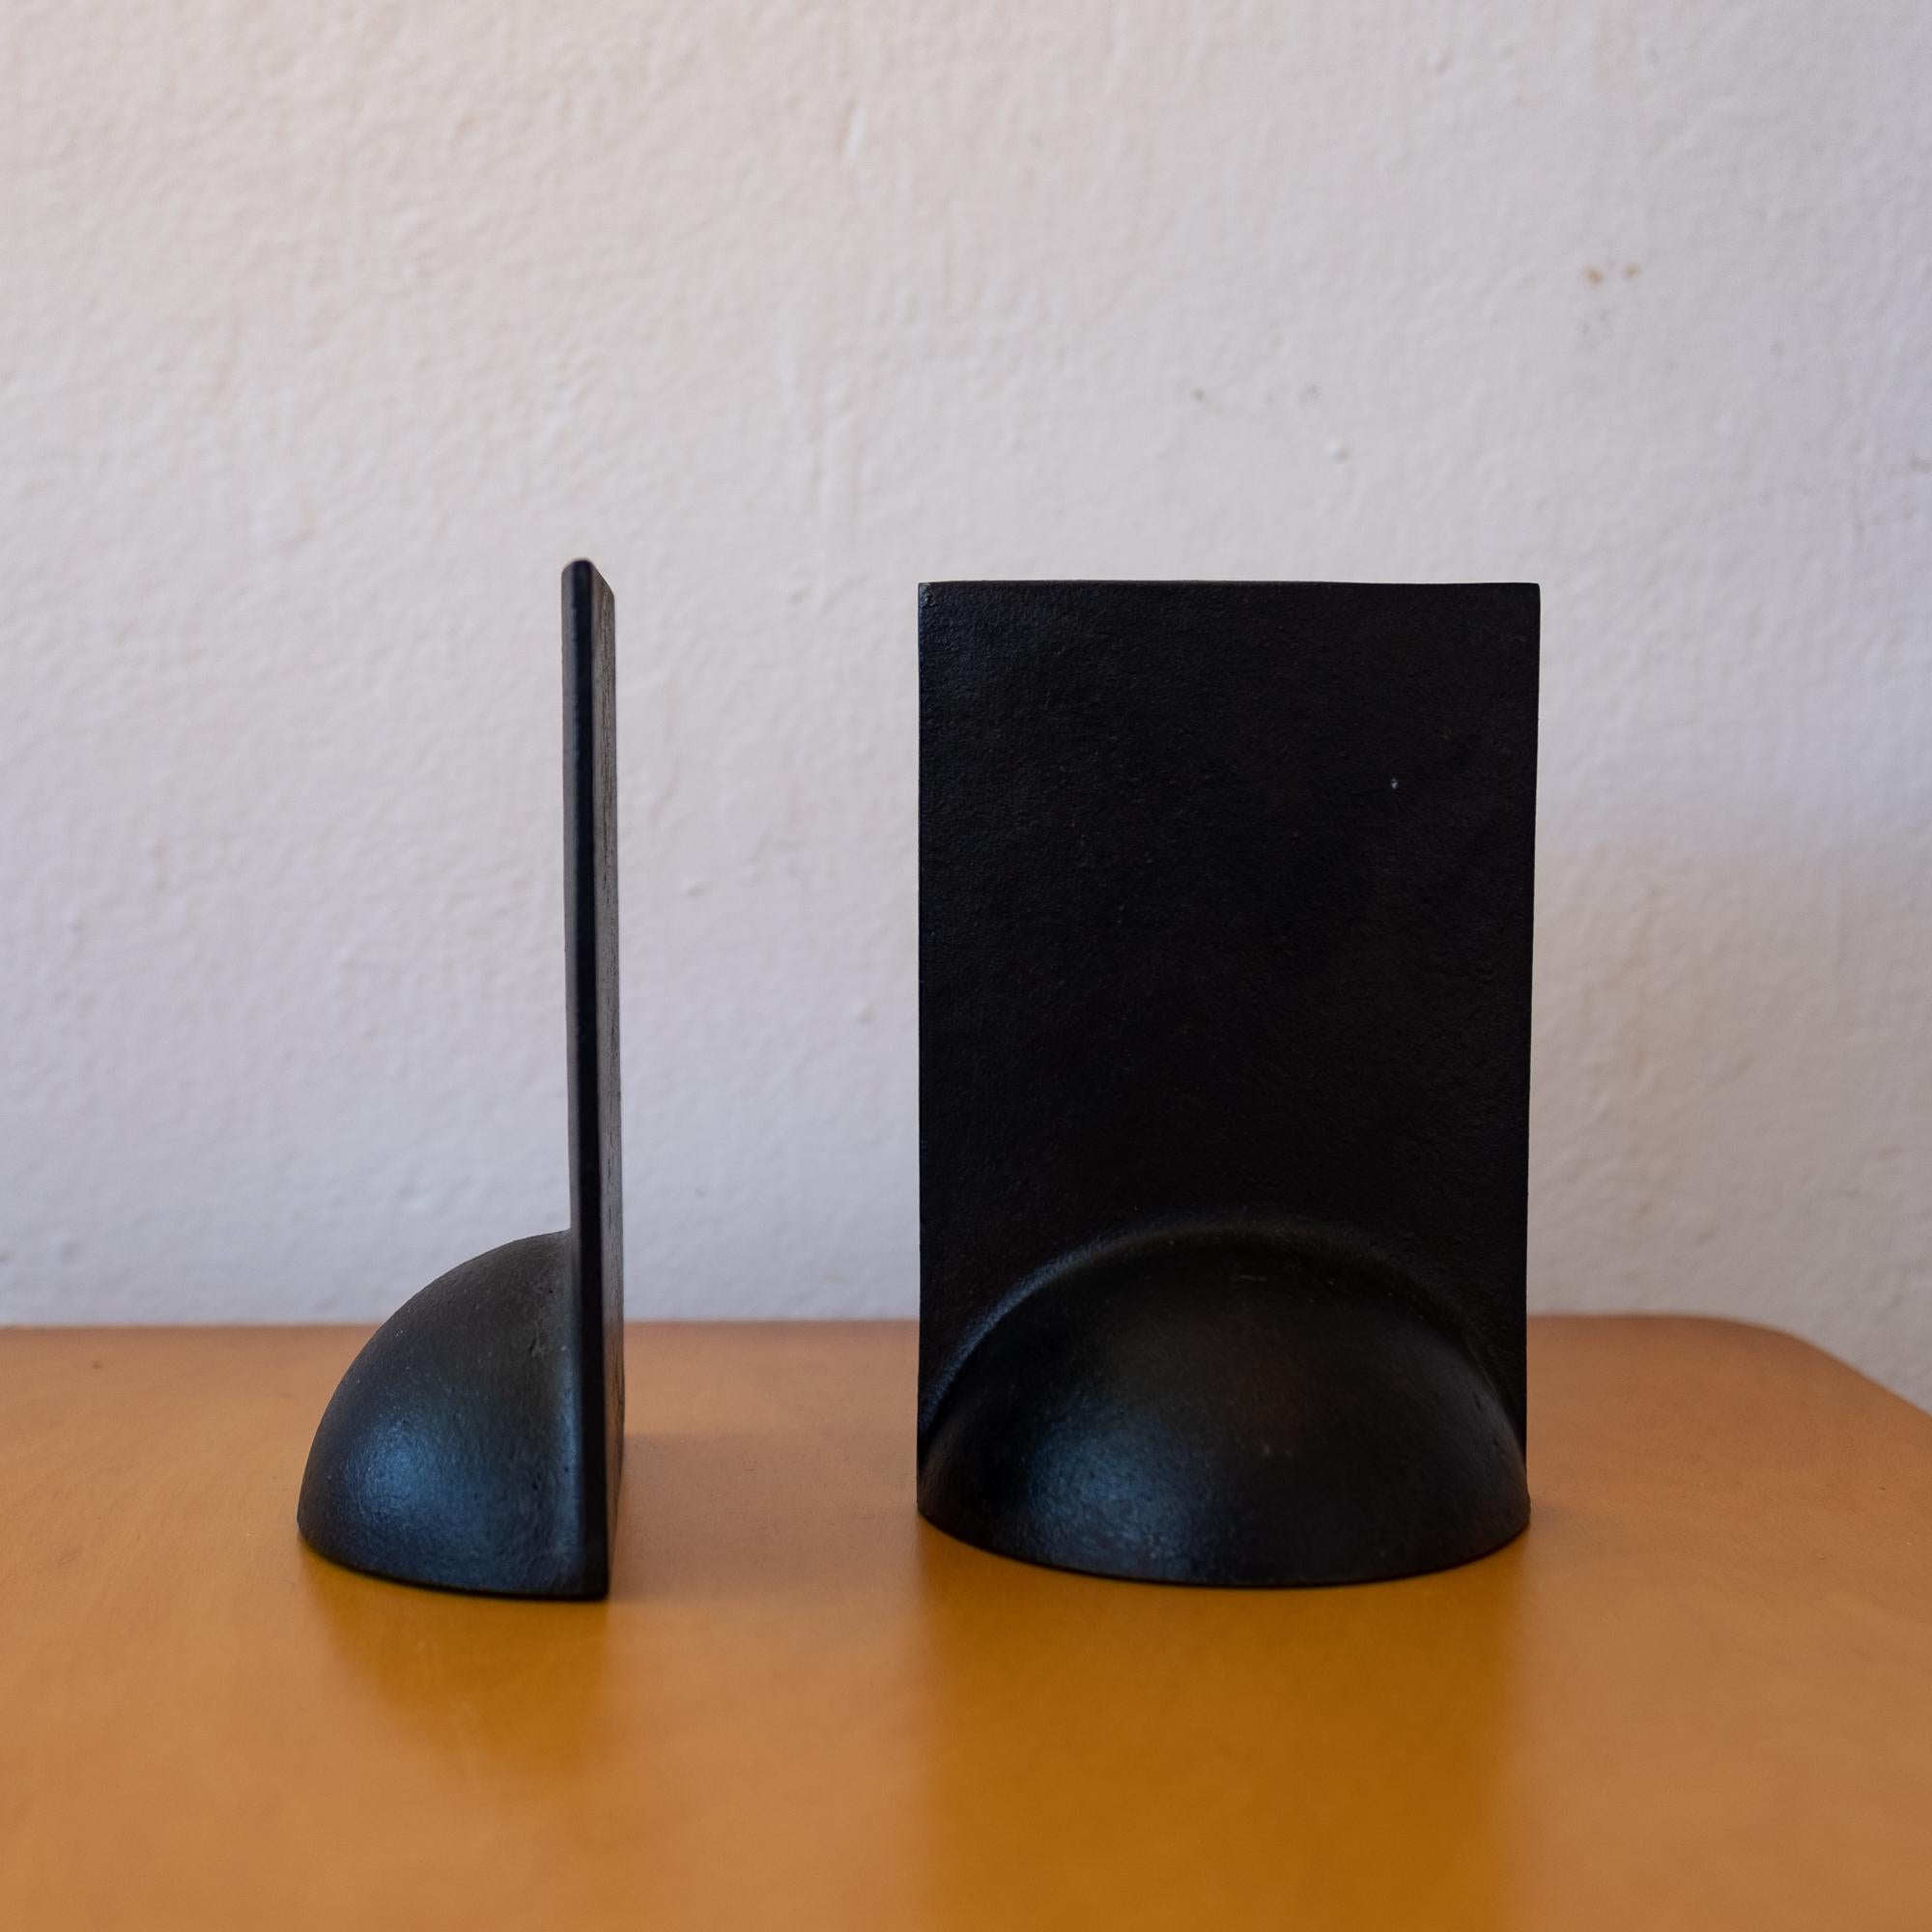 Modernist Japanese iron bookends. Solid iron with a nice patina. Made in Japan label on the bottom, 1960s